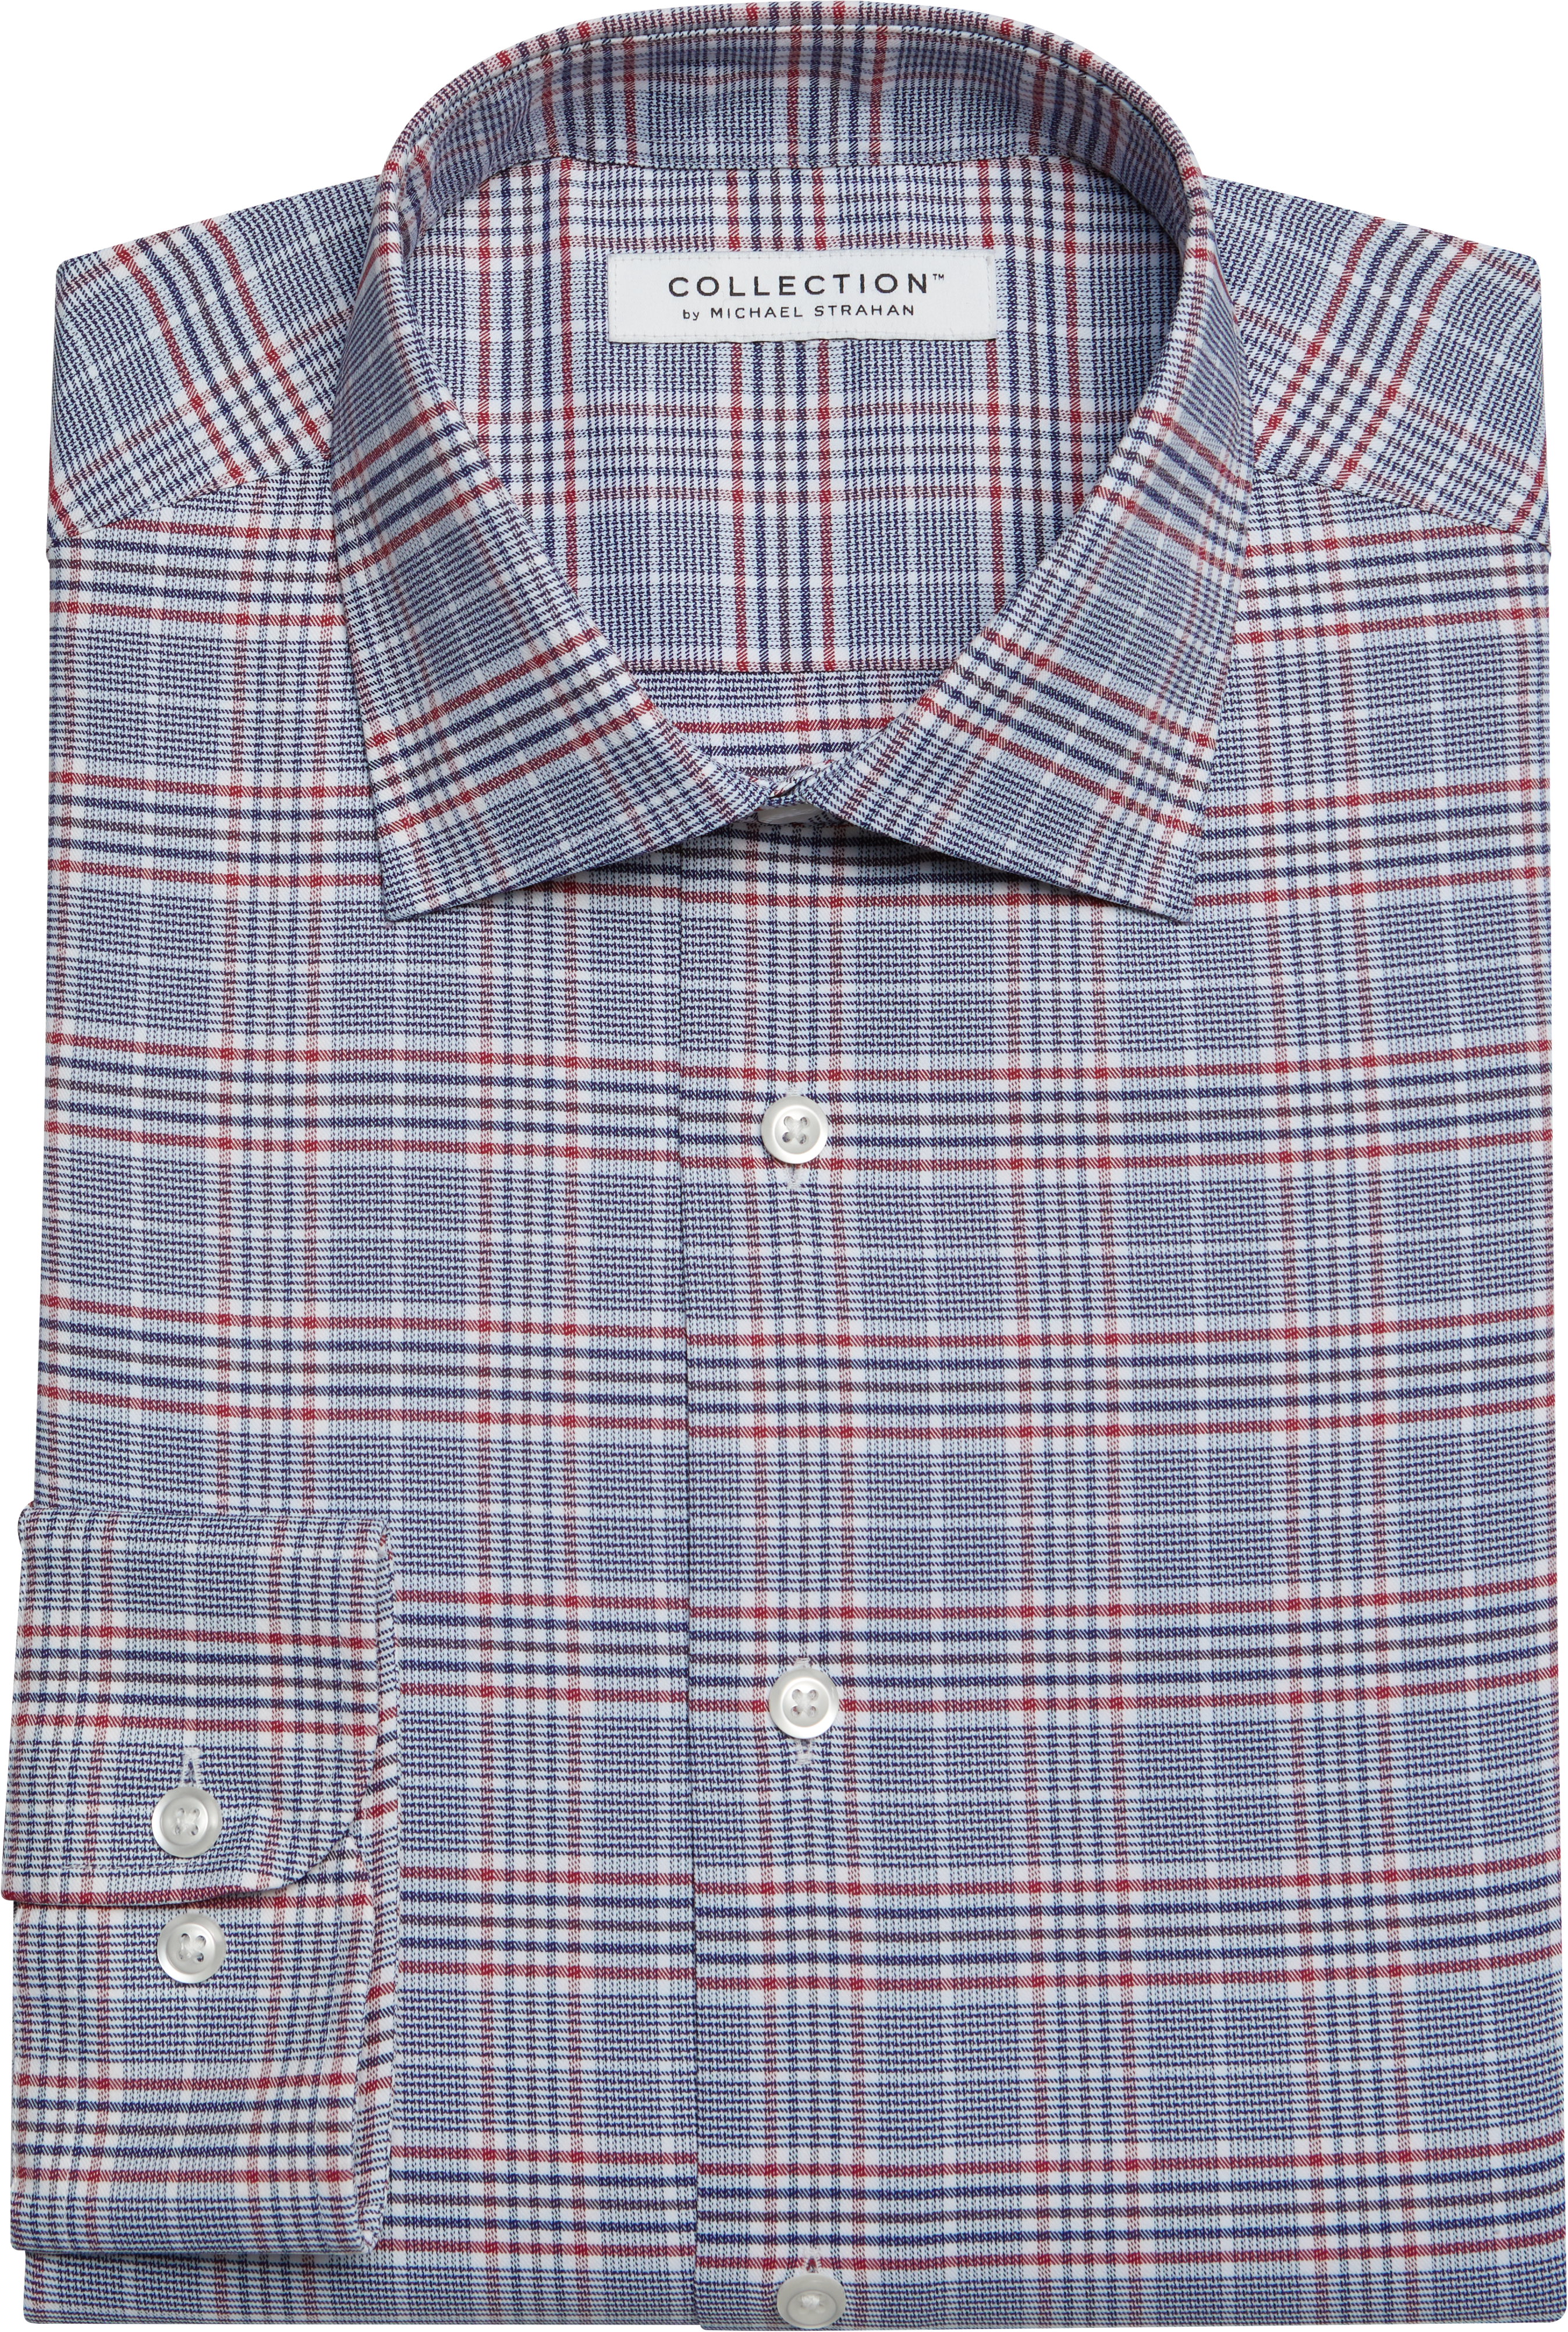 Collection By Michael Strahan Classic Fit Dress Shirt Red And Navy Plaid Mens Sale Mens 